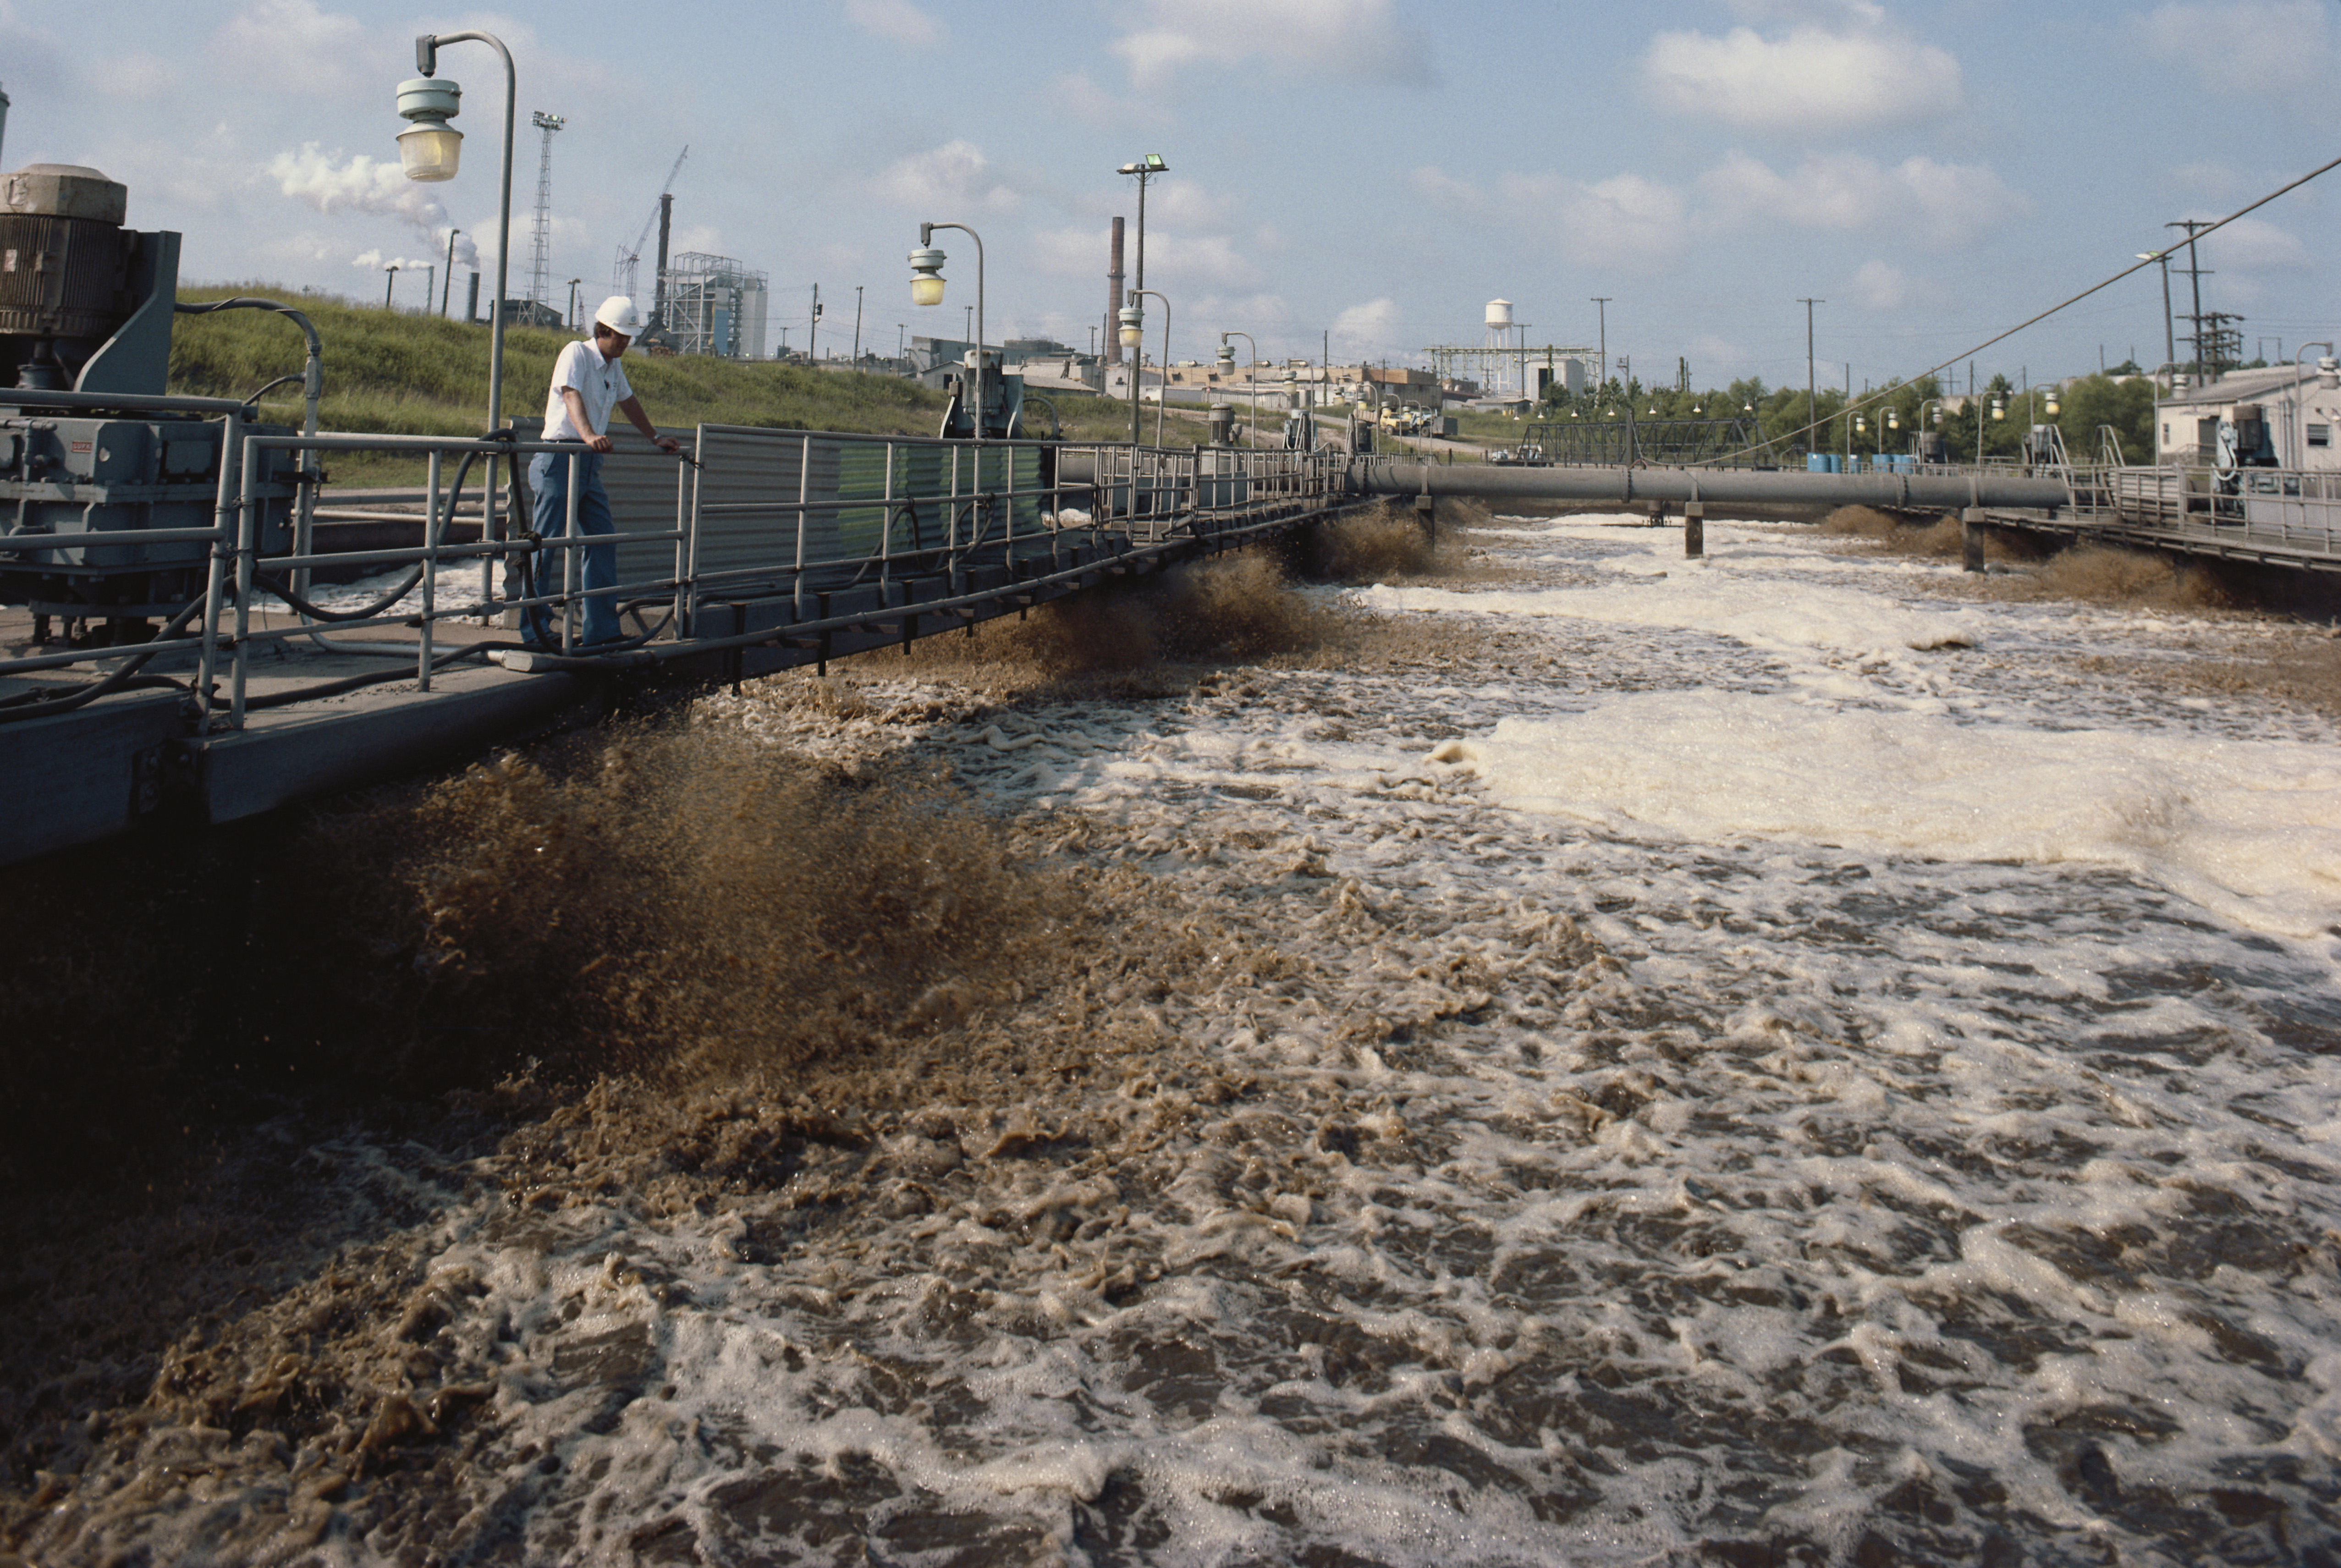 Aerators at a Texas paper mill clarify waste water.